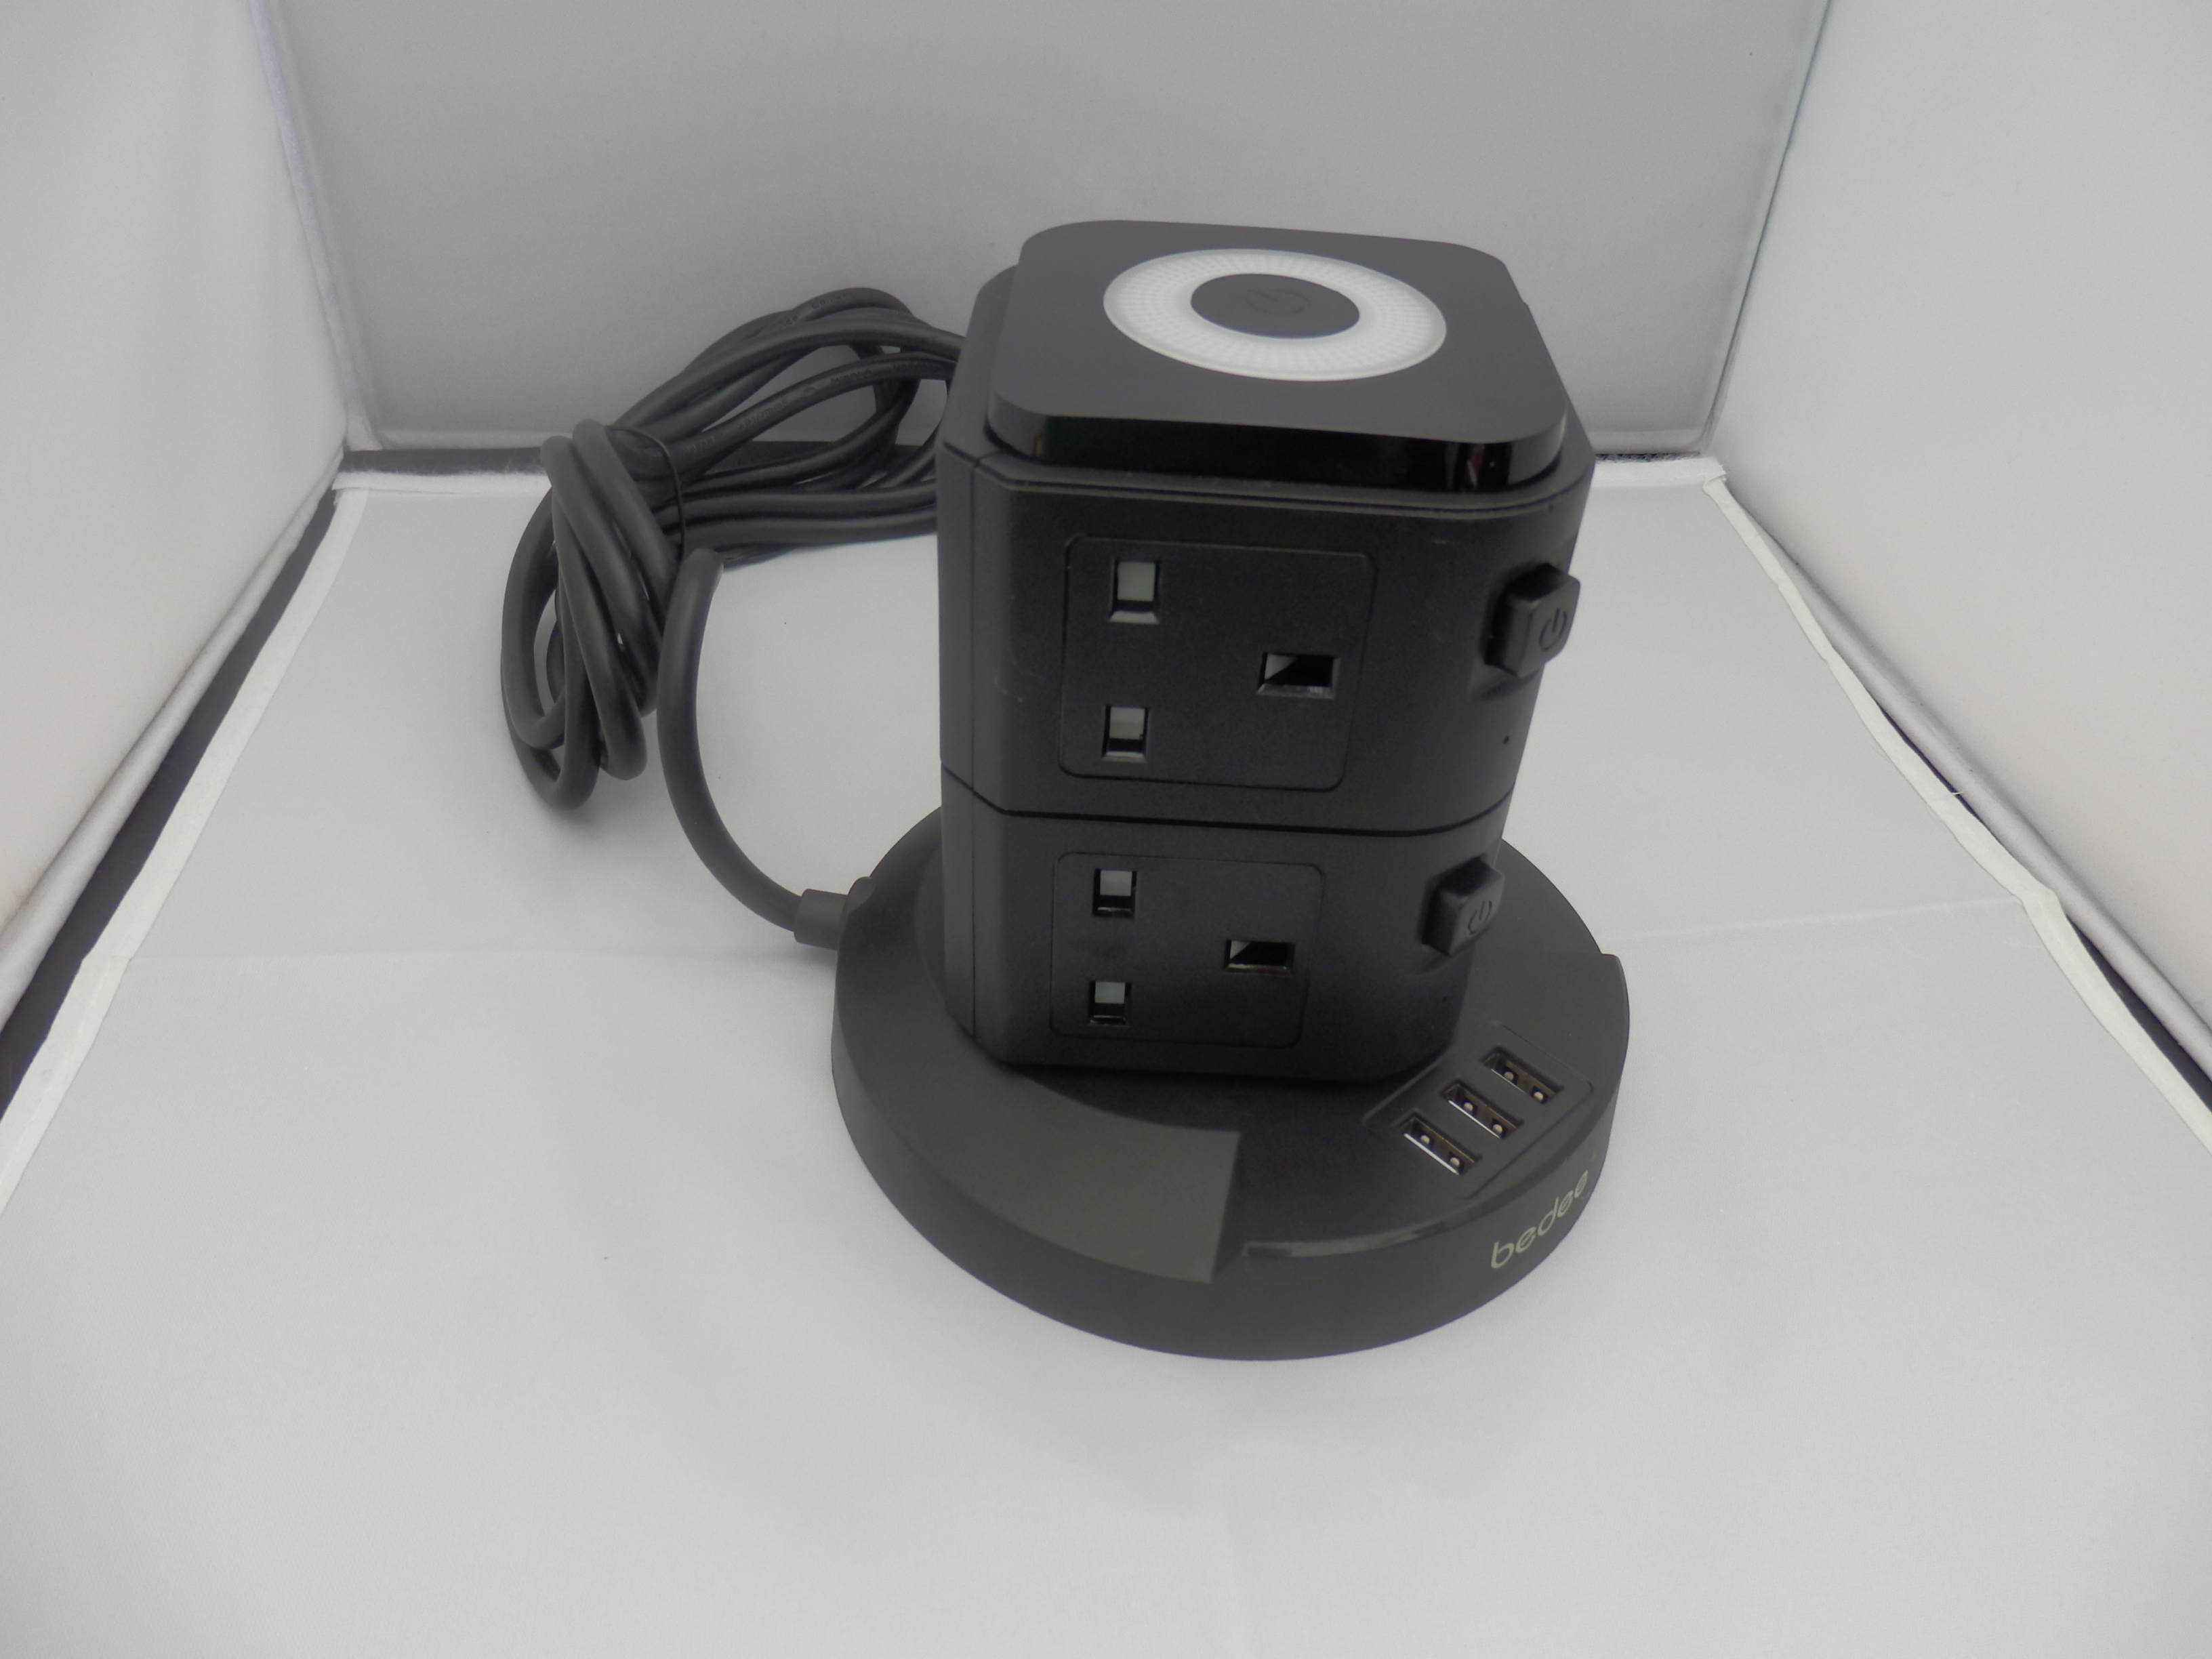 Tower Extension Plug with 8 AC Outlets, 3 USB Ports and Night Light by Bedee